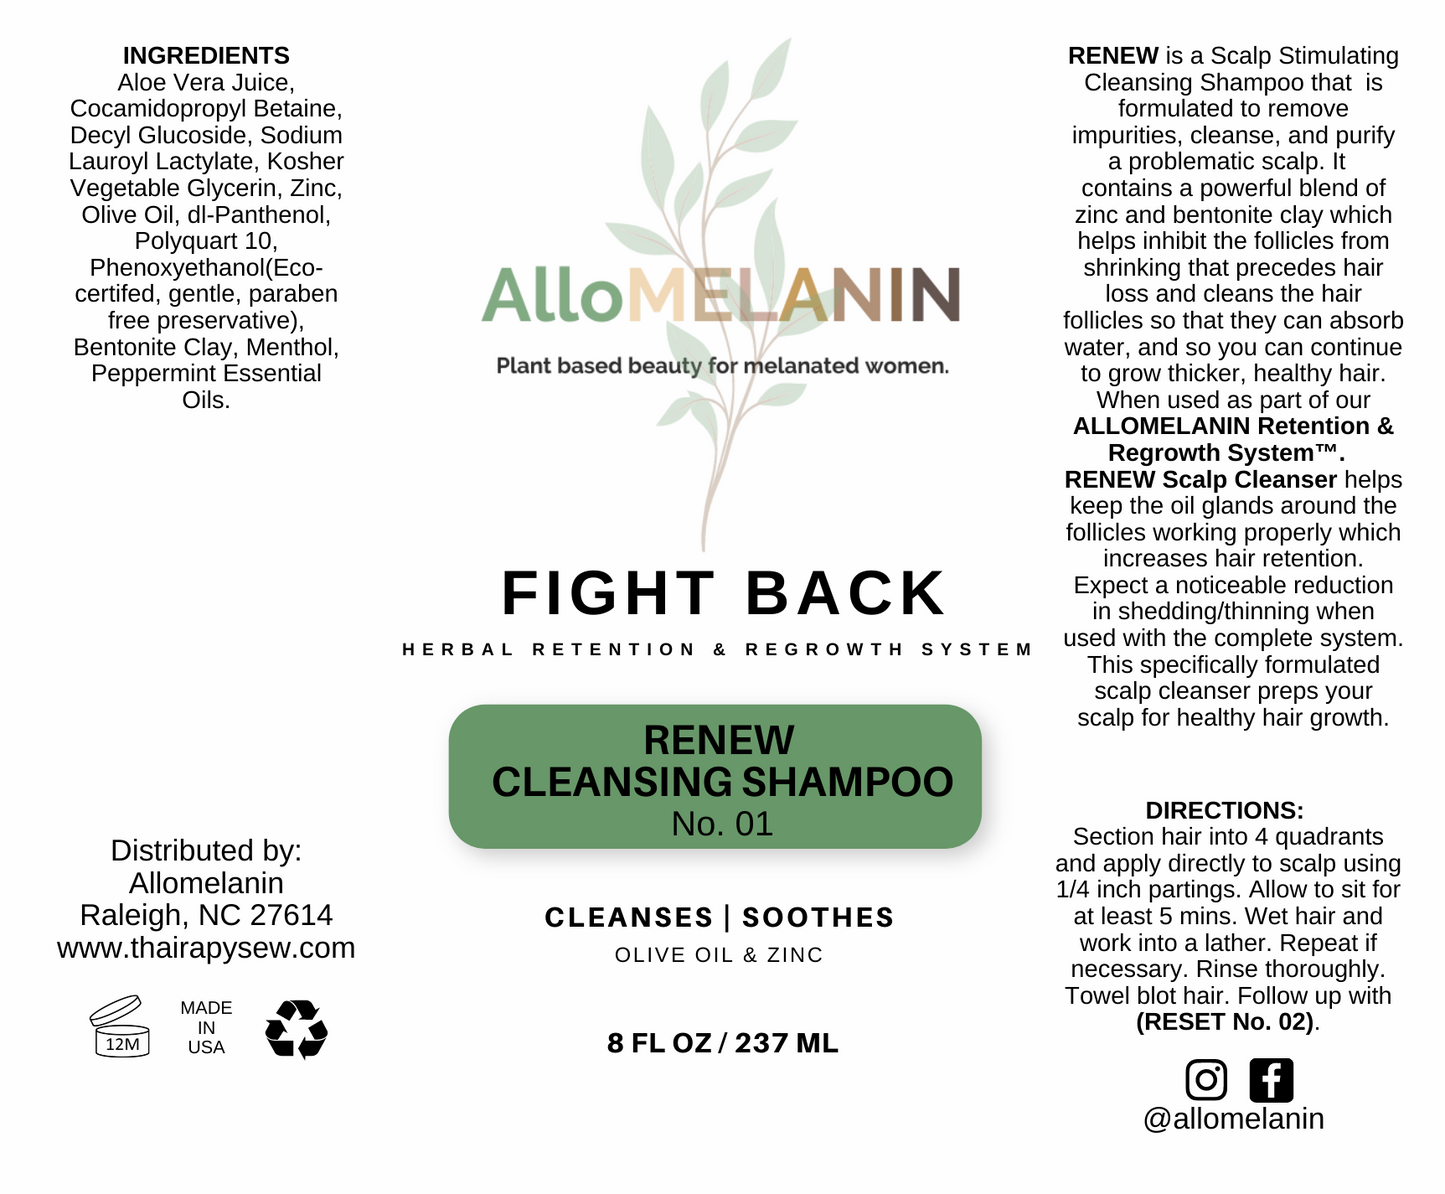 Fight Back Renew Cleansing Shampoo Step #1